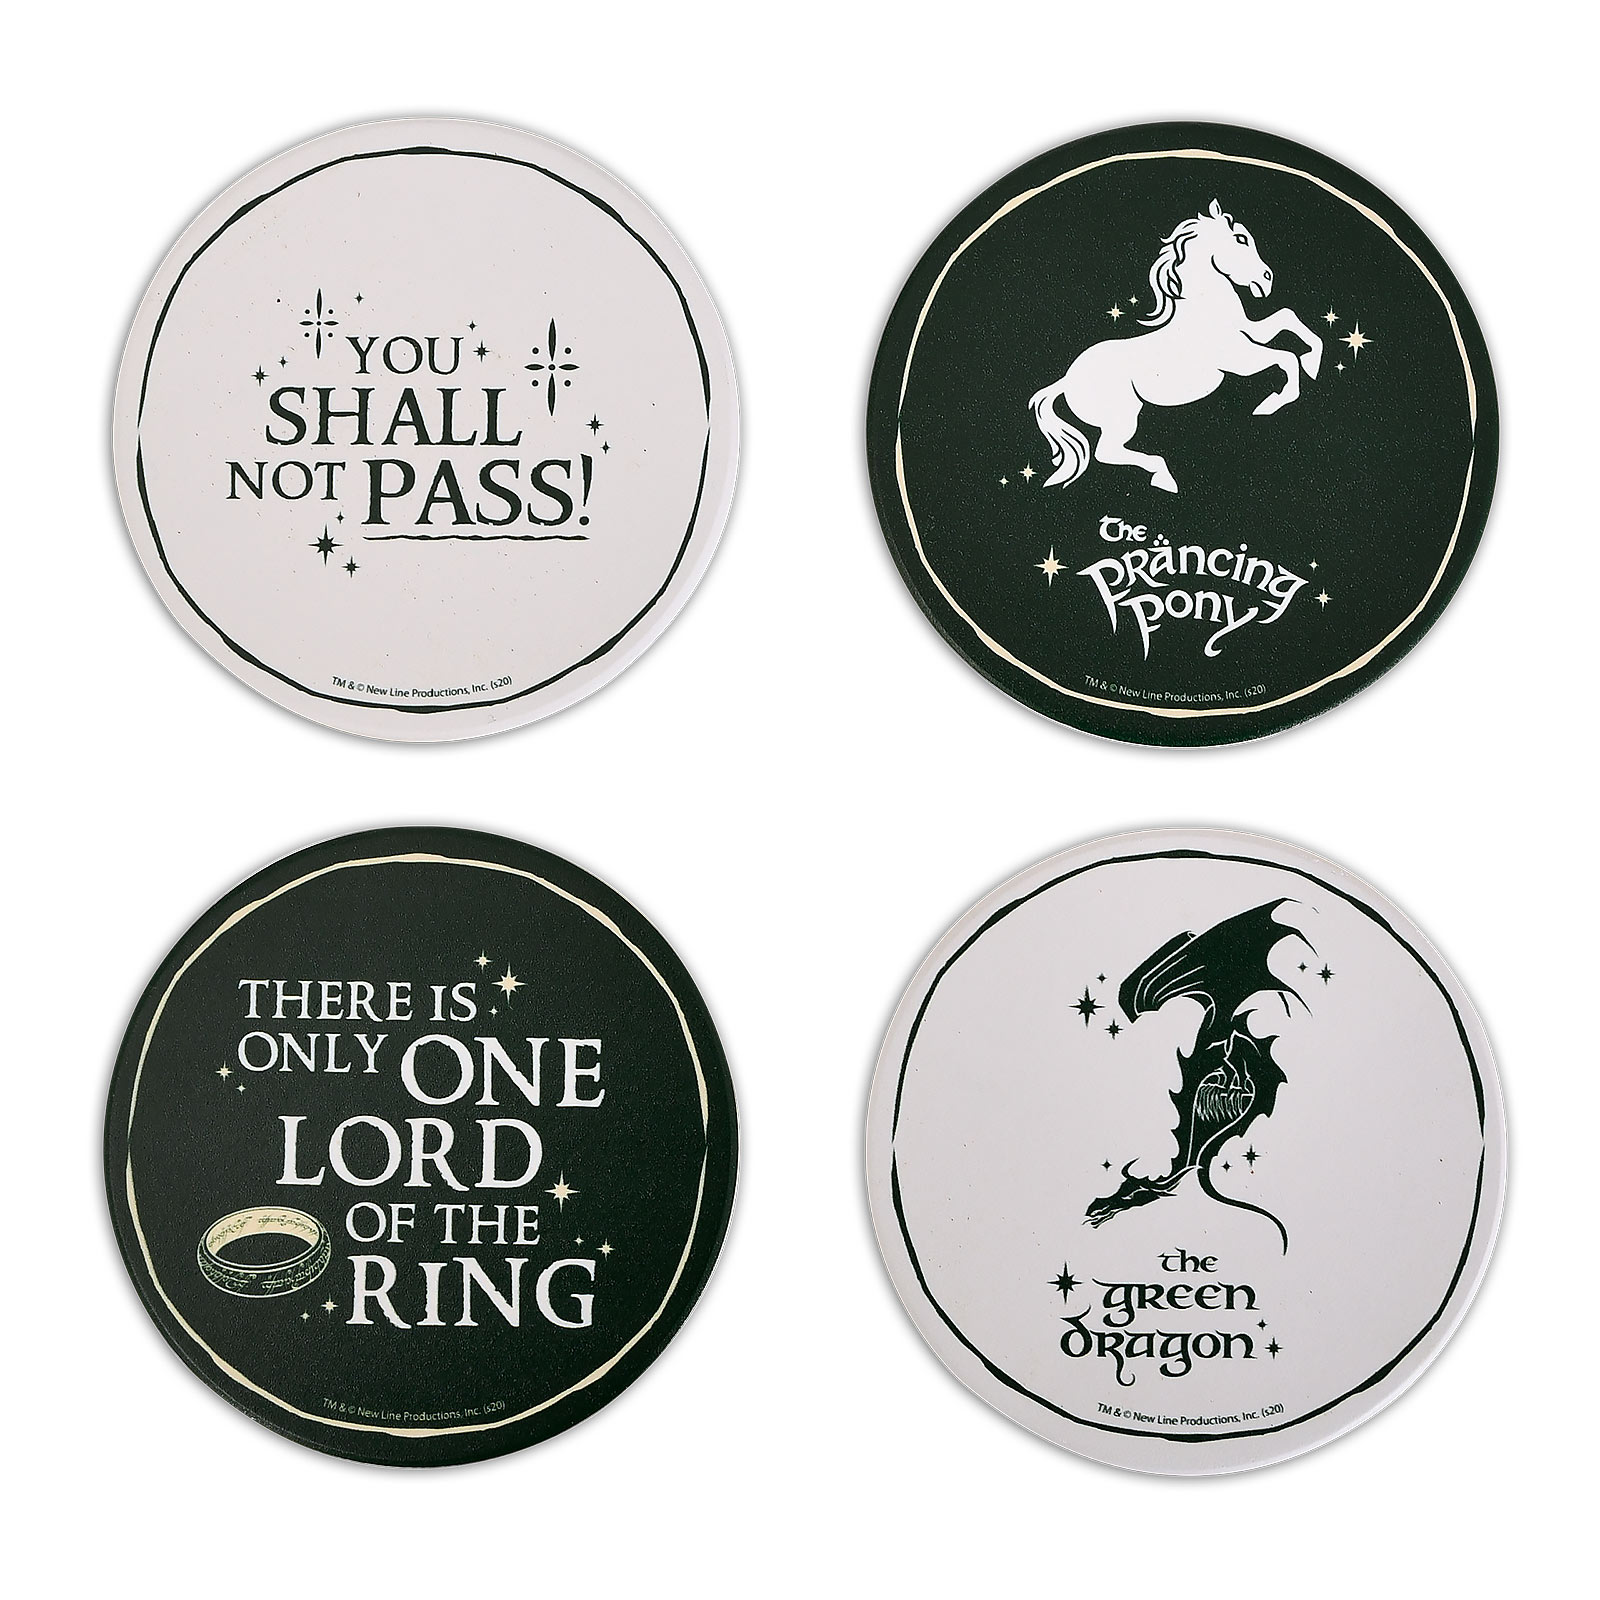 Lord of the Rings Coaster 4 Piece Set